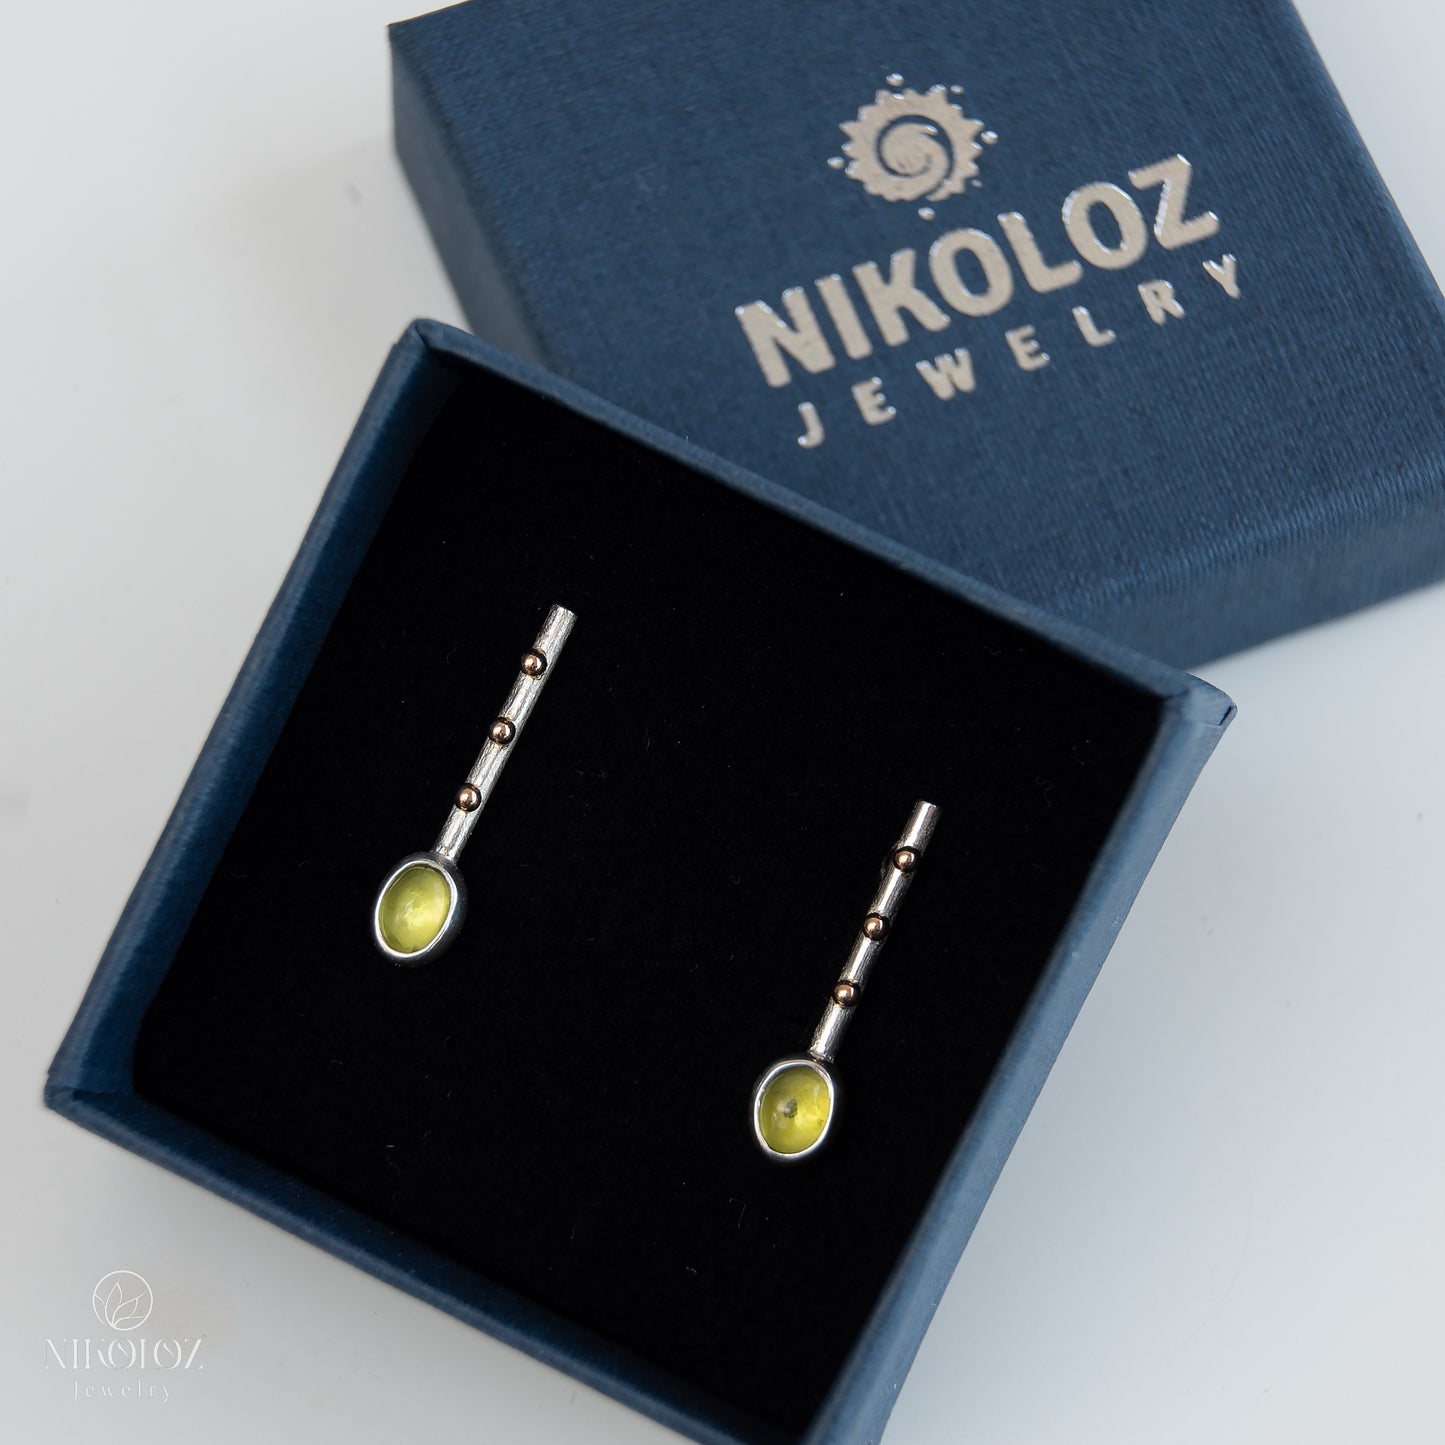 Multicolour Silver Earrings "Music Notes" with 14K Gold Beads